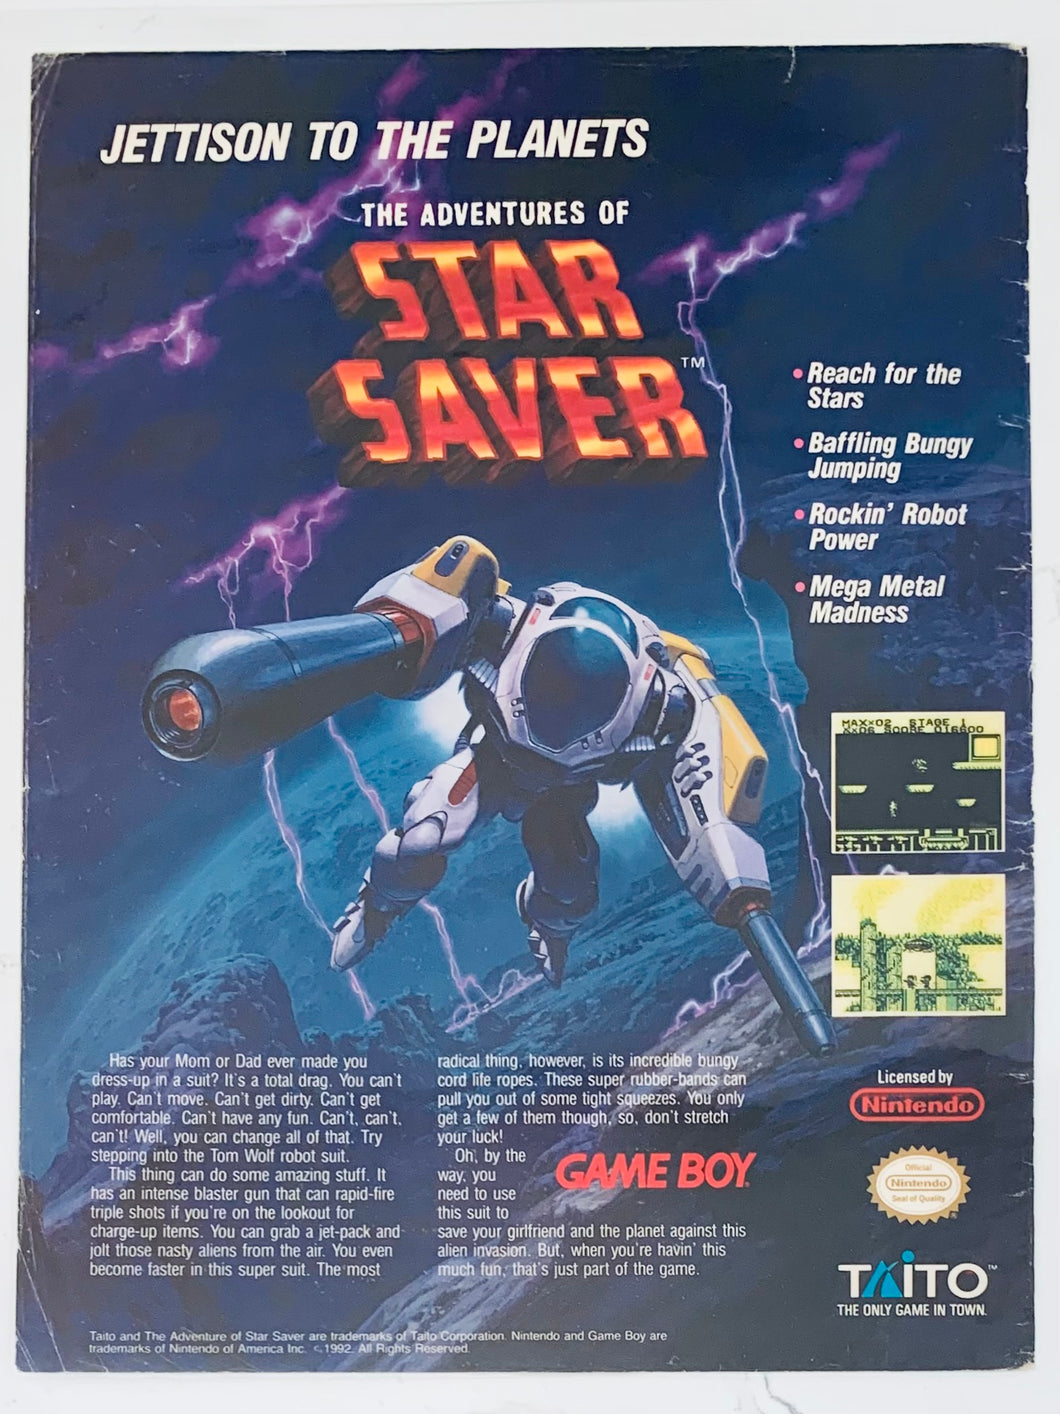 The Adventures of Star Saver - Game Boy - Original Vintage Advertisement - Print Ads - Laminated A4 Poster